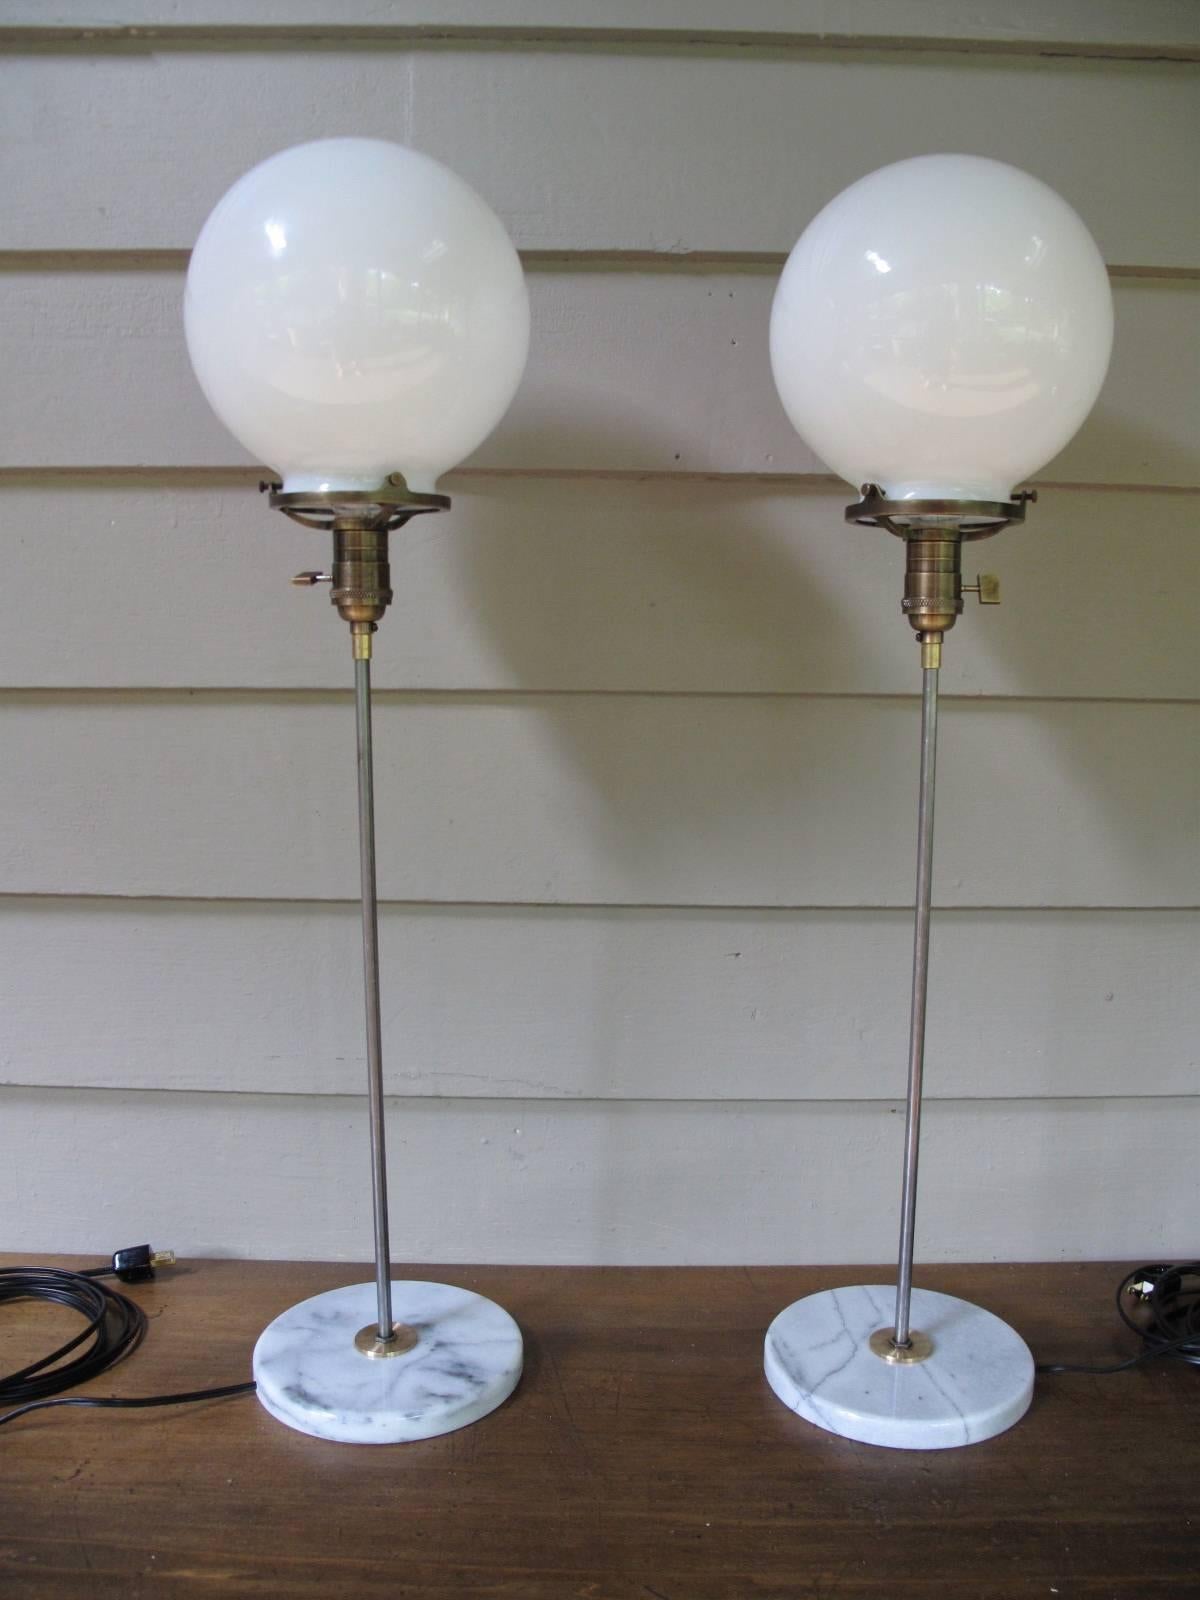 Pair of table lamps, each having round milk glass shades on steel rods. Veined white marble base. 

Globe diameter 8